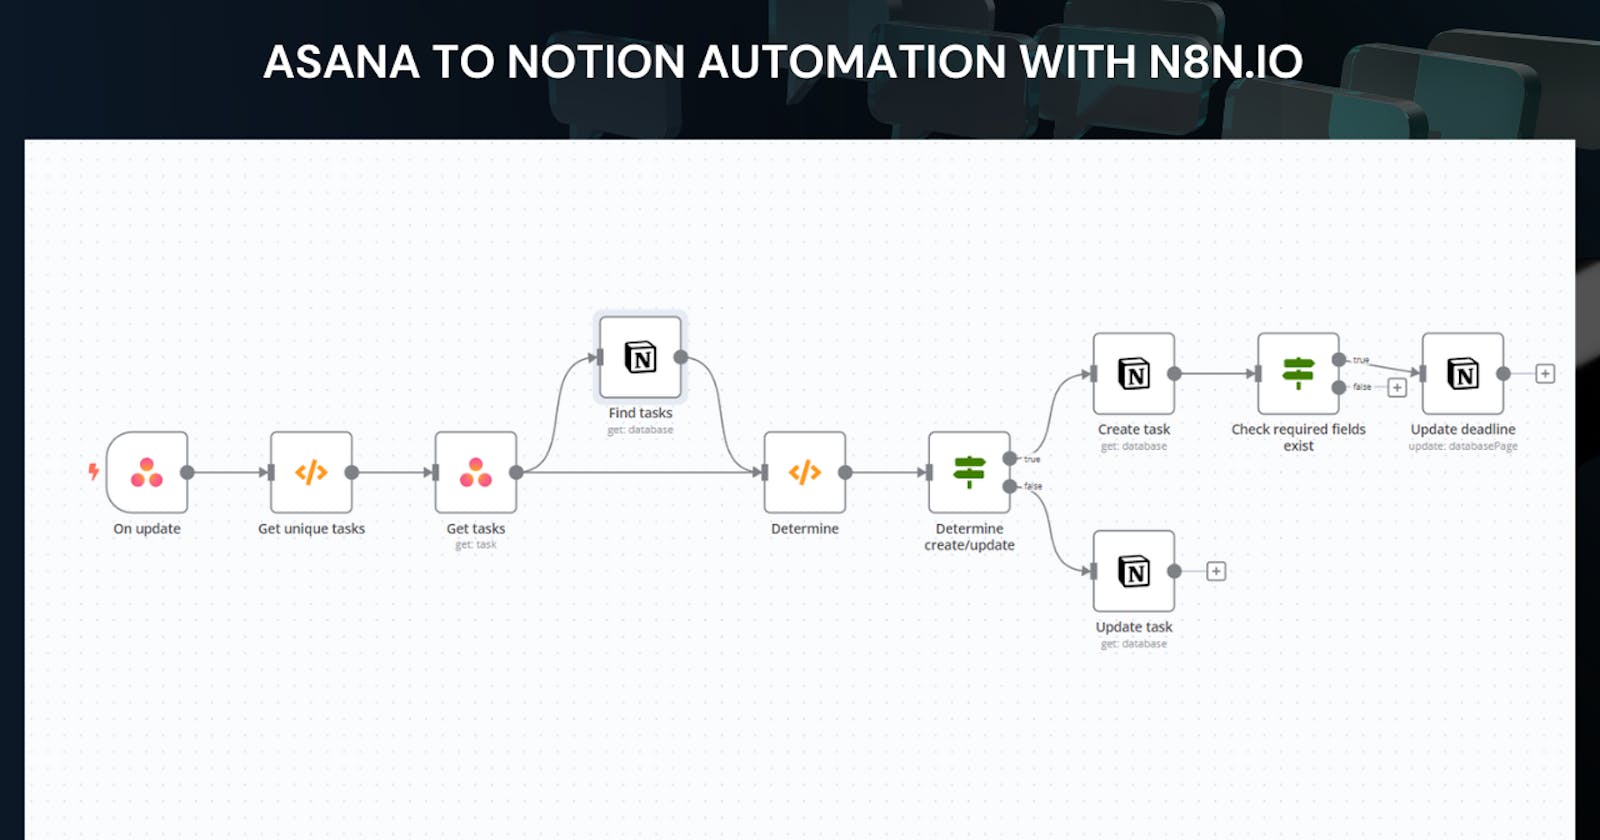 Asana to Notion Workflow with n8n